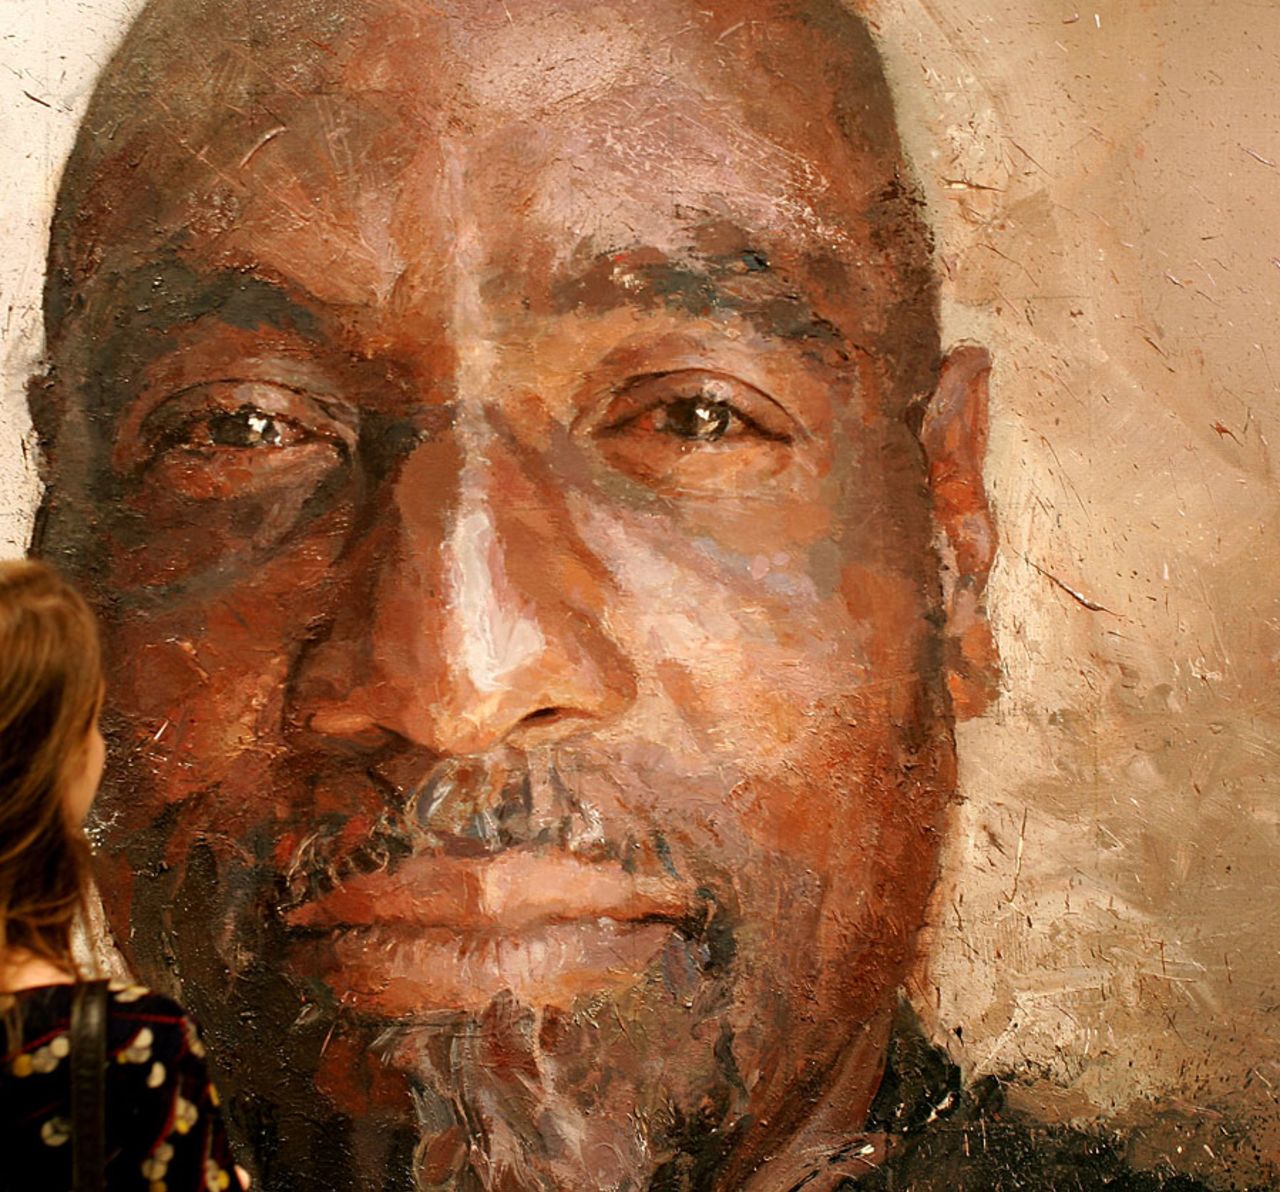 A Portrait of Viv Richards by Brendan Kelly is seen during the Royal Society of Portrait Painters Annual Exhibition, London, April 25, 2007